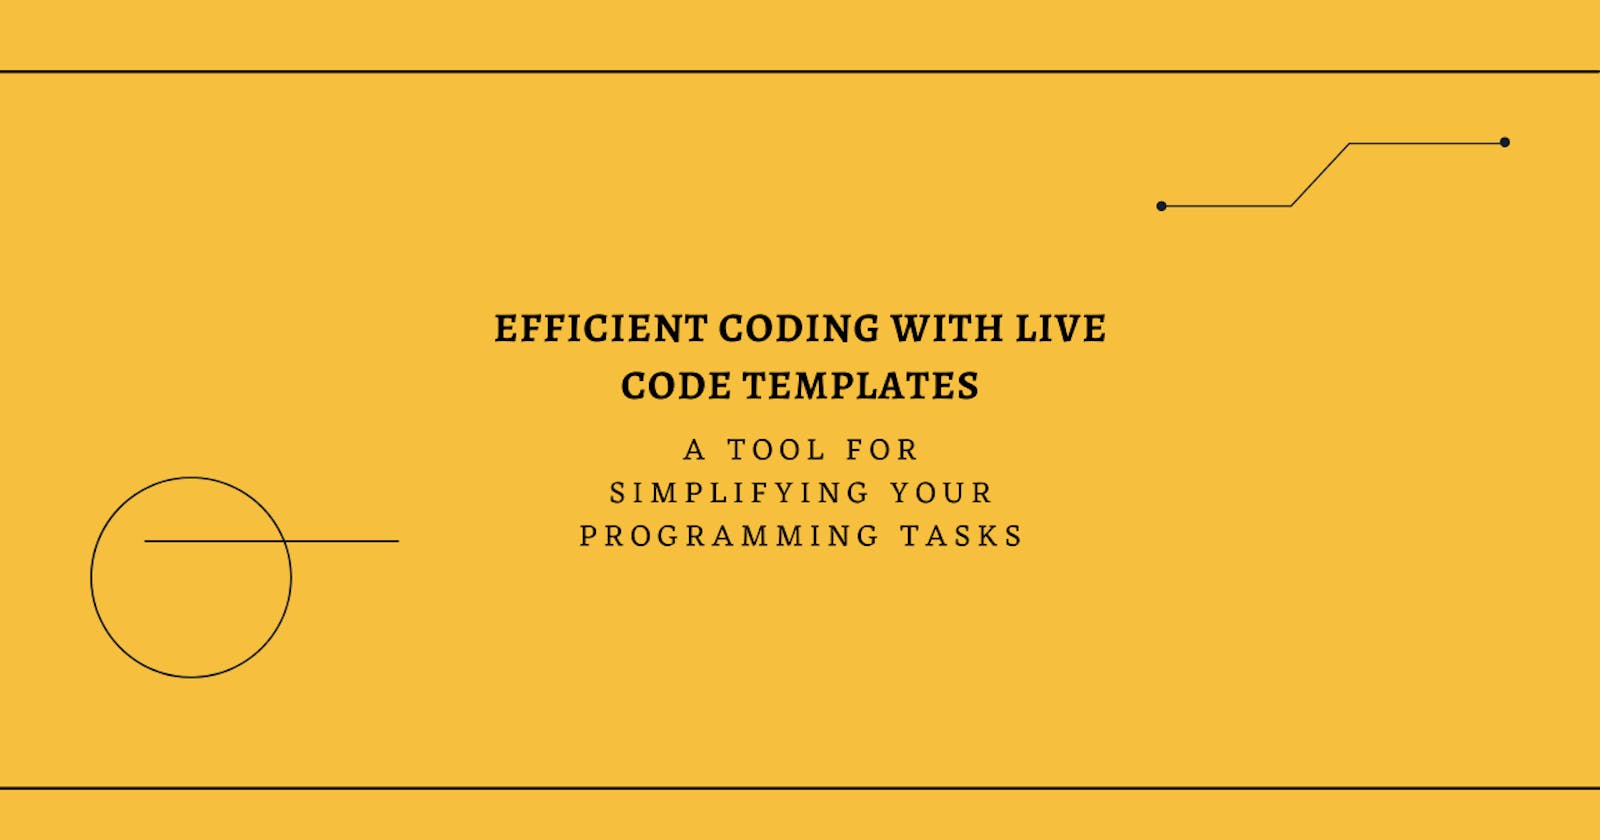 Efficient Coding with Live Code Templates in Android Studio: A Tool for Simplifying Your Programming Tasks